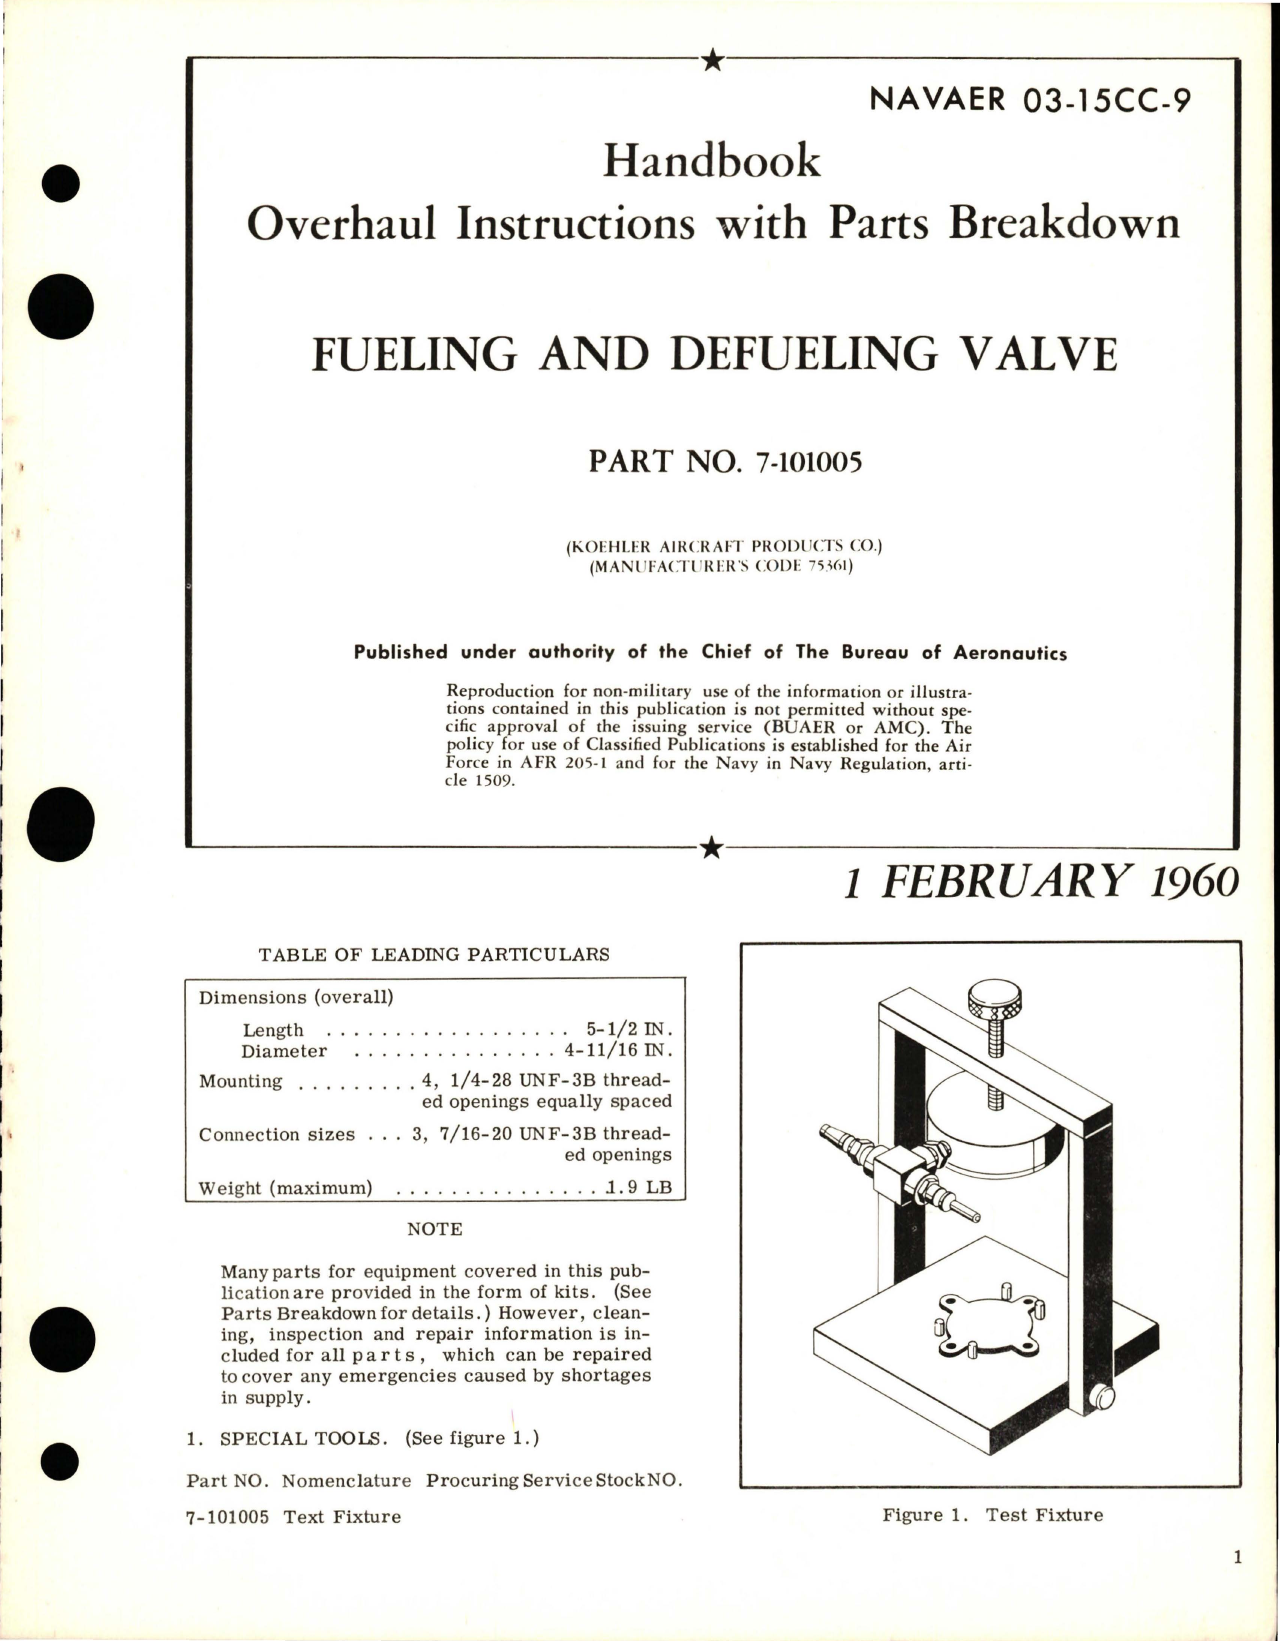 Sample page 1 from AirCorps Library document: Overhaul Instructions with Parts Breakdown for Fueling and Defueling Valve - Part 7-101005 